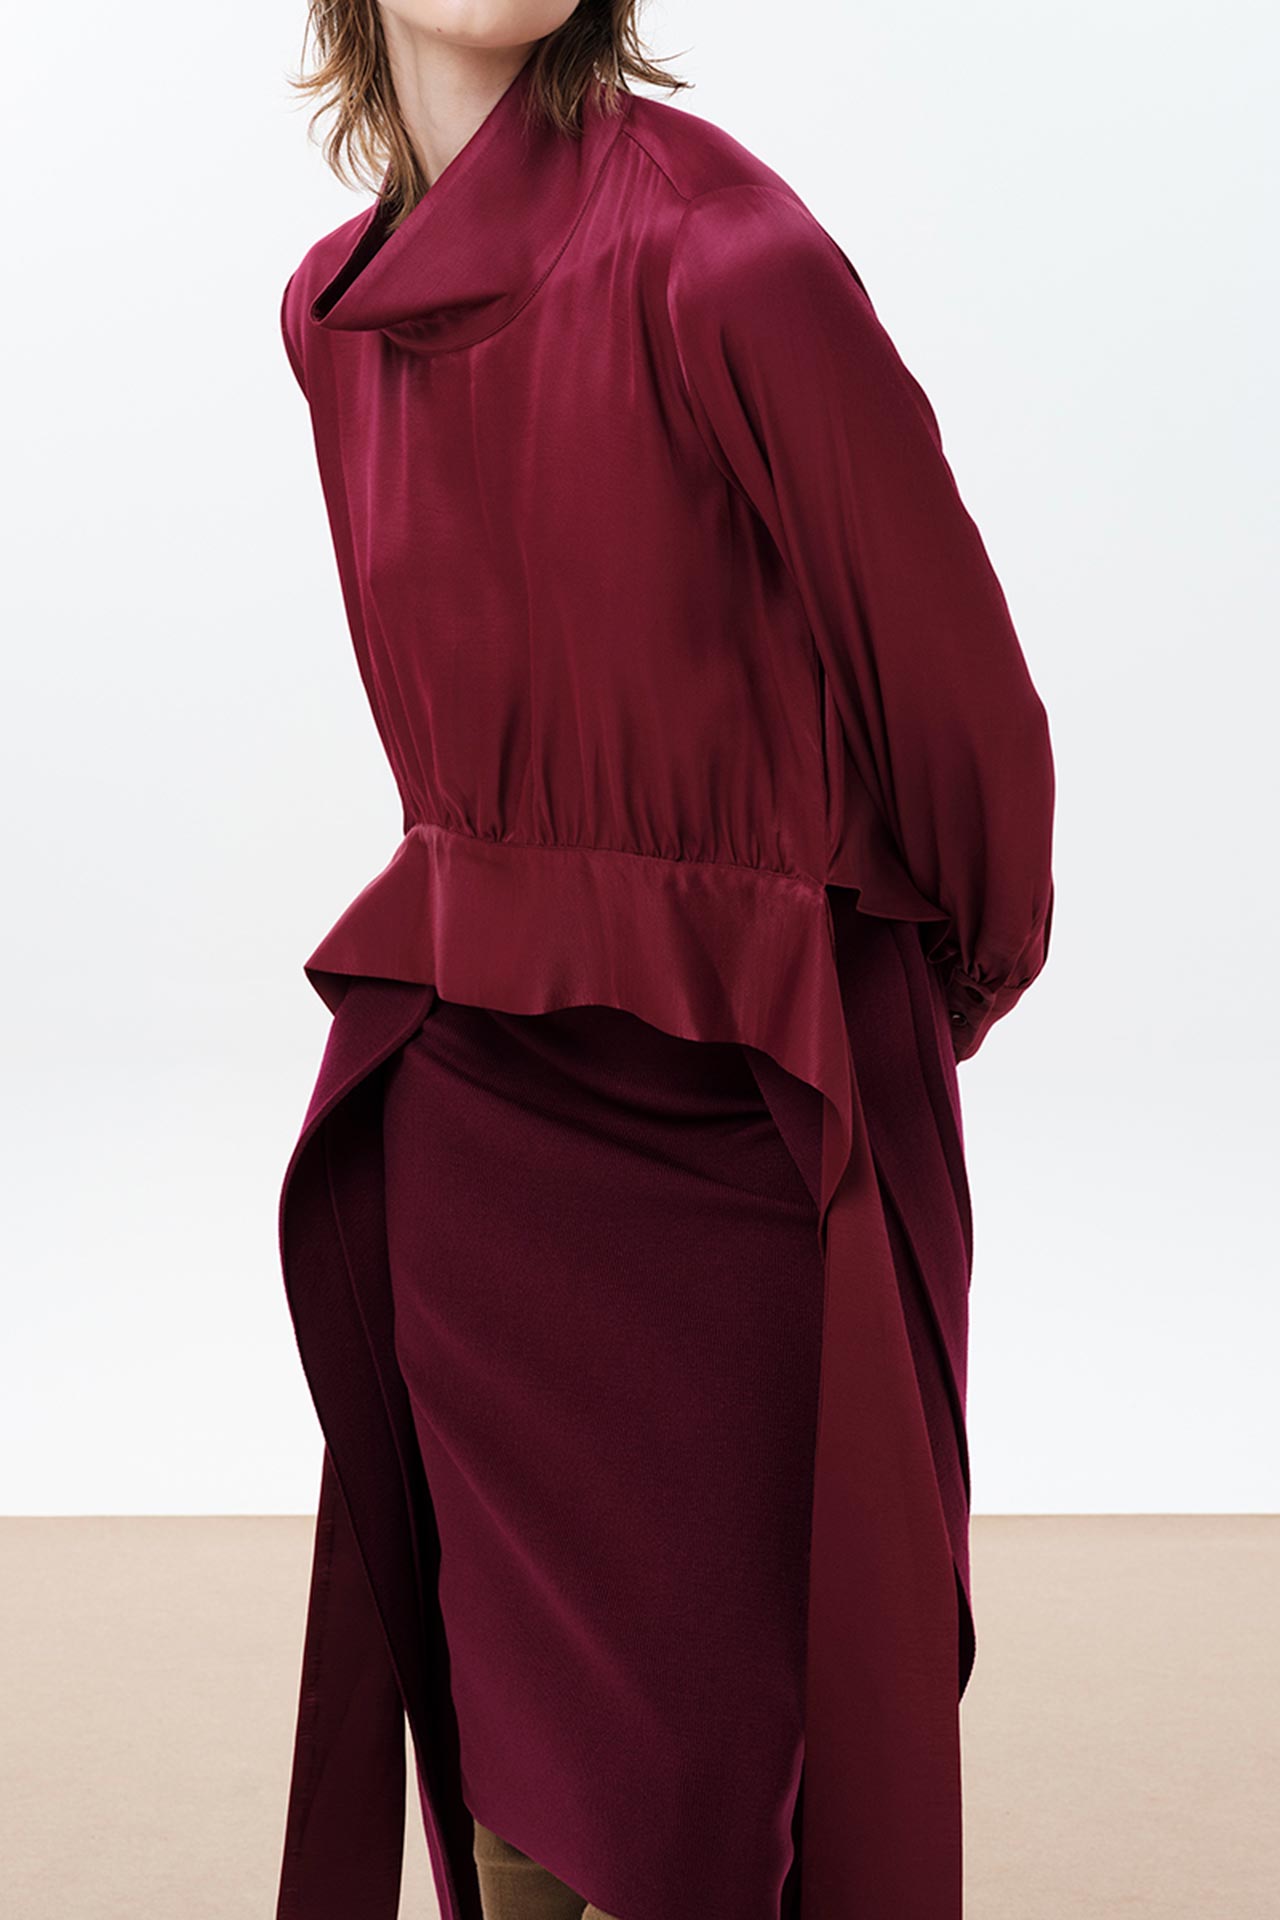 IOANNA KOURBELA IN THE FLOW RUBY RED LONG-SLEEVE TOP WITH ATTATCHED BELT DETAIL